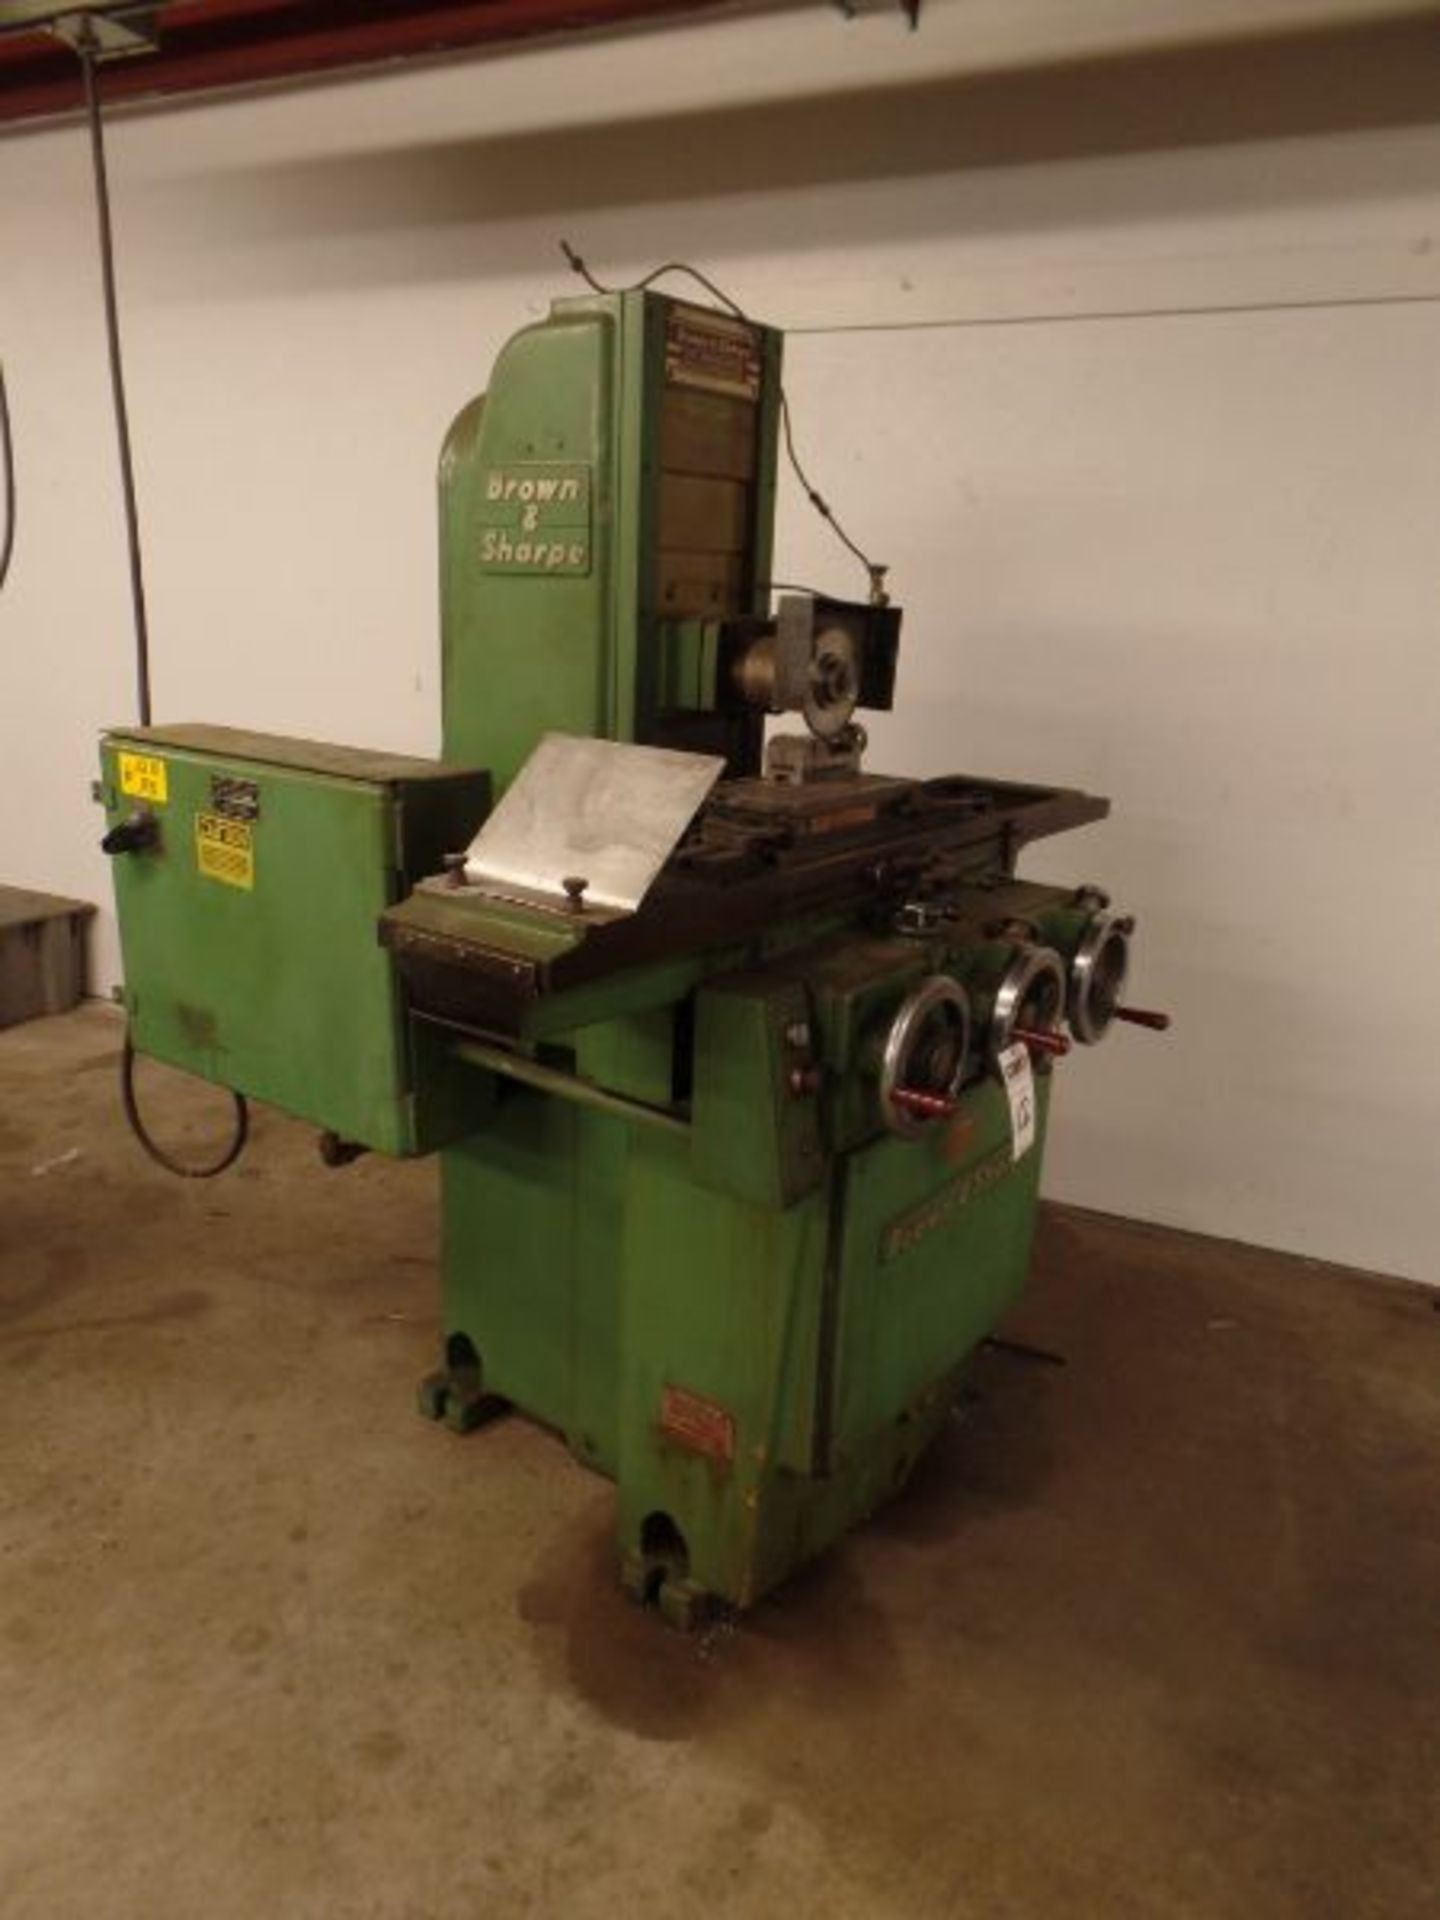 Brown & Sharpe 618 Micromaster Hyd. Surface Grinder, 6"x18" Magnetic Chuck, S/N 523-6181-797 - Image 7 of 10